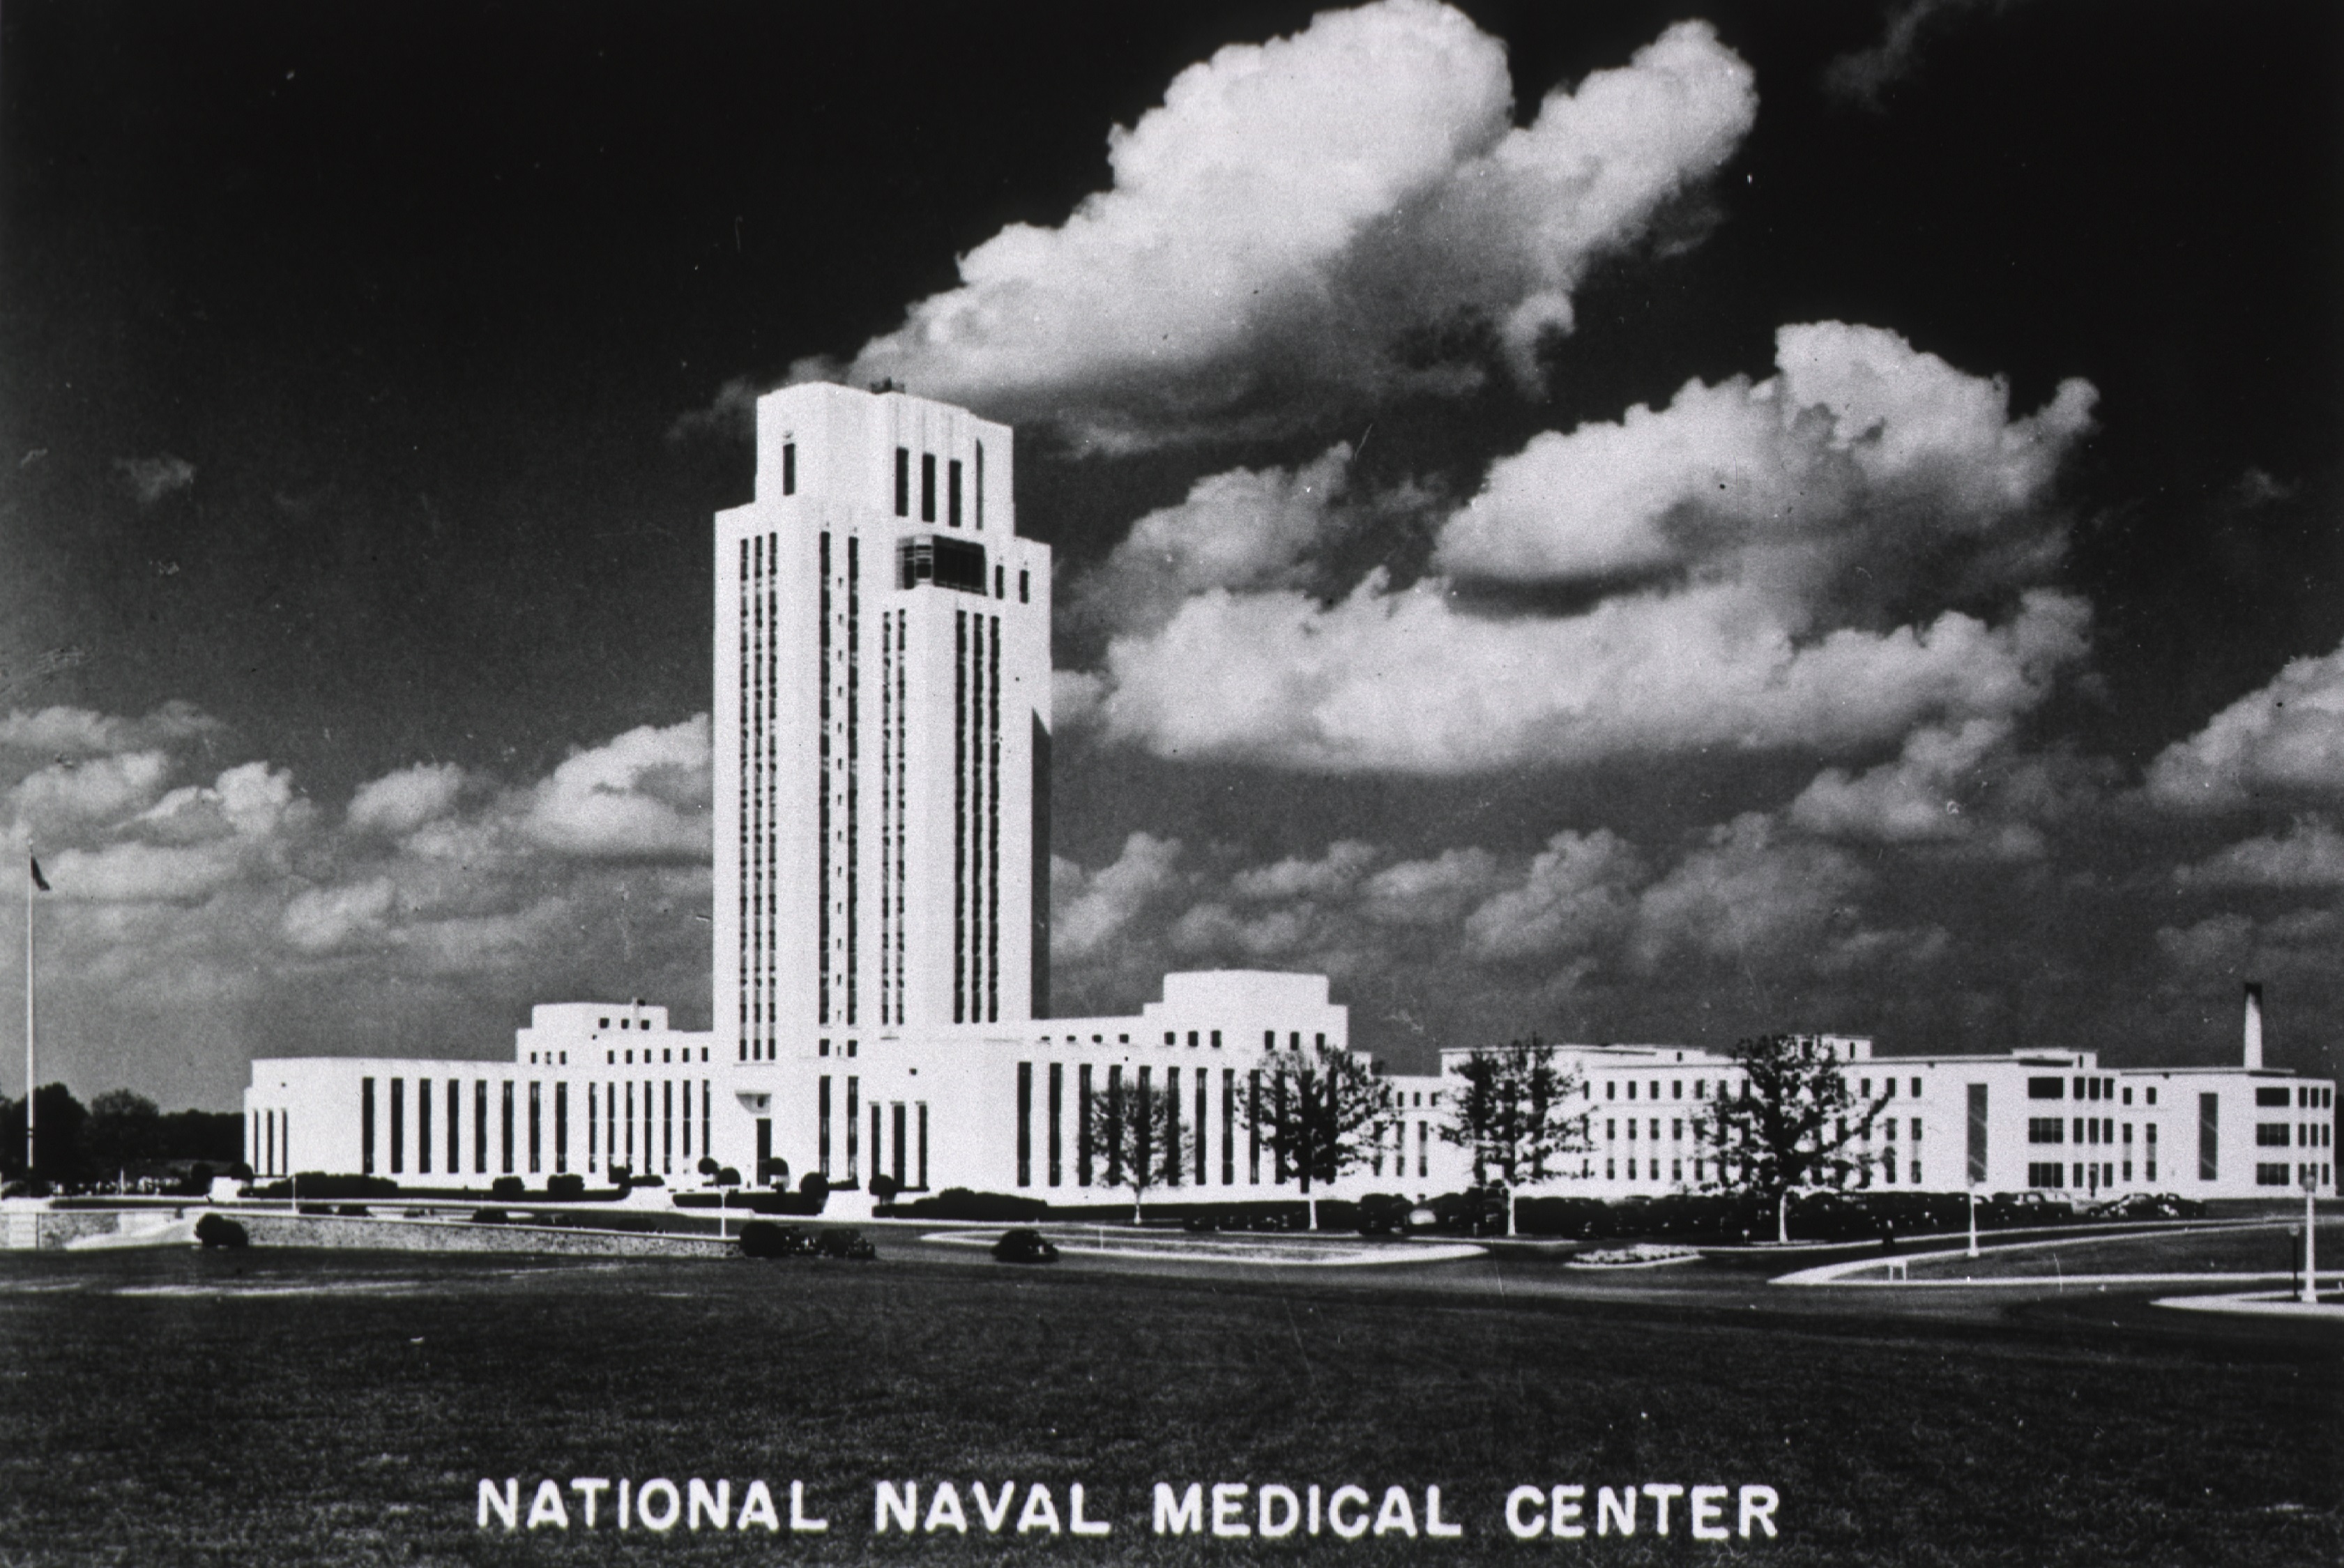 Naval Medical Hospital in the 1940s.